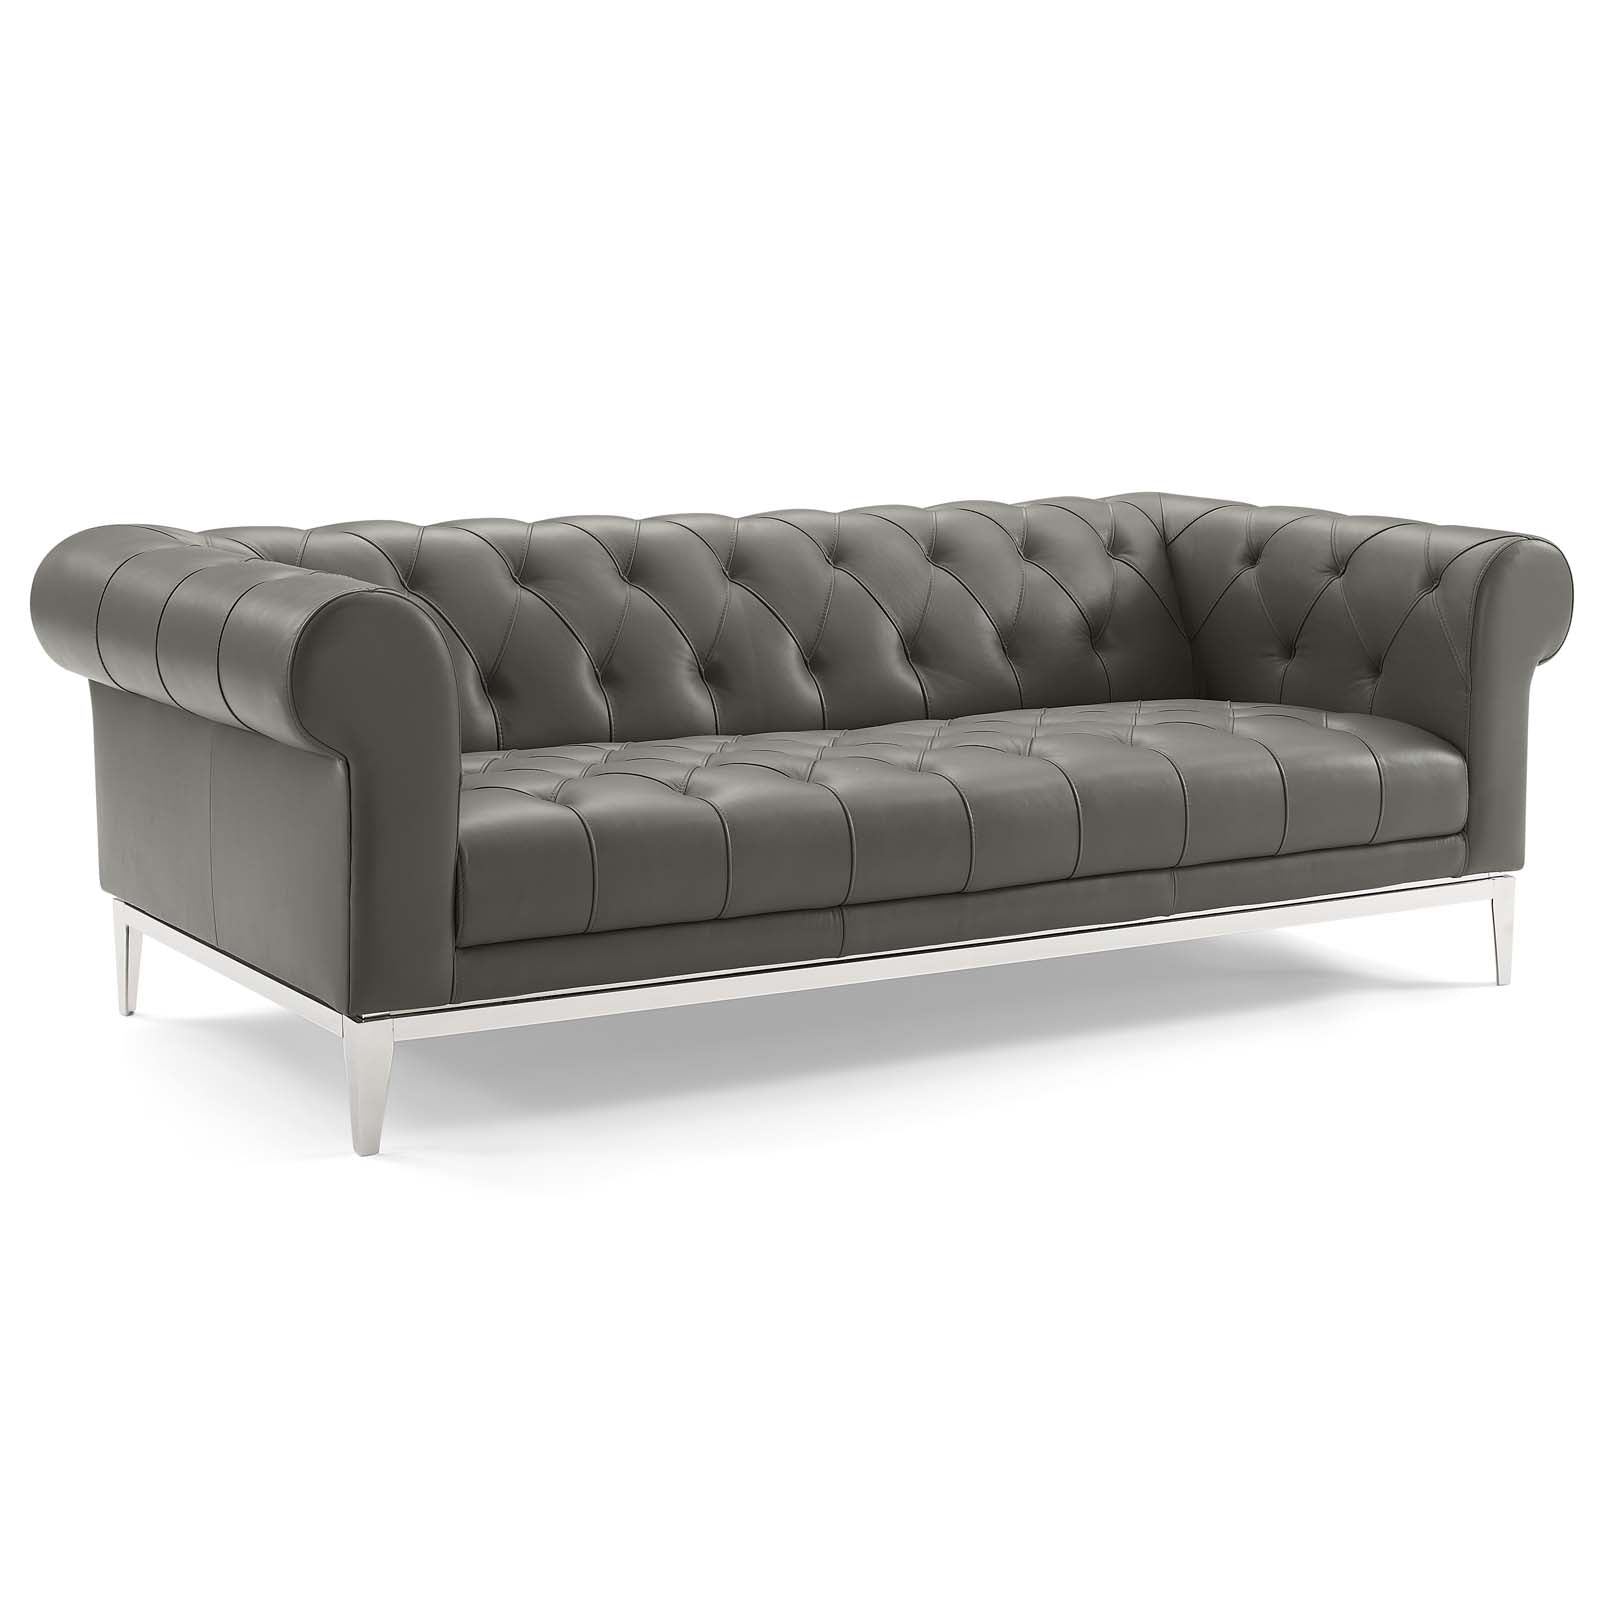 Modway Sofas & Couches - Idyll Tufted Button Upholstered Leather Chesterfield Sofa Gray